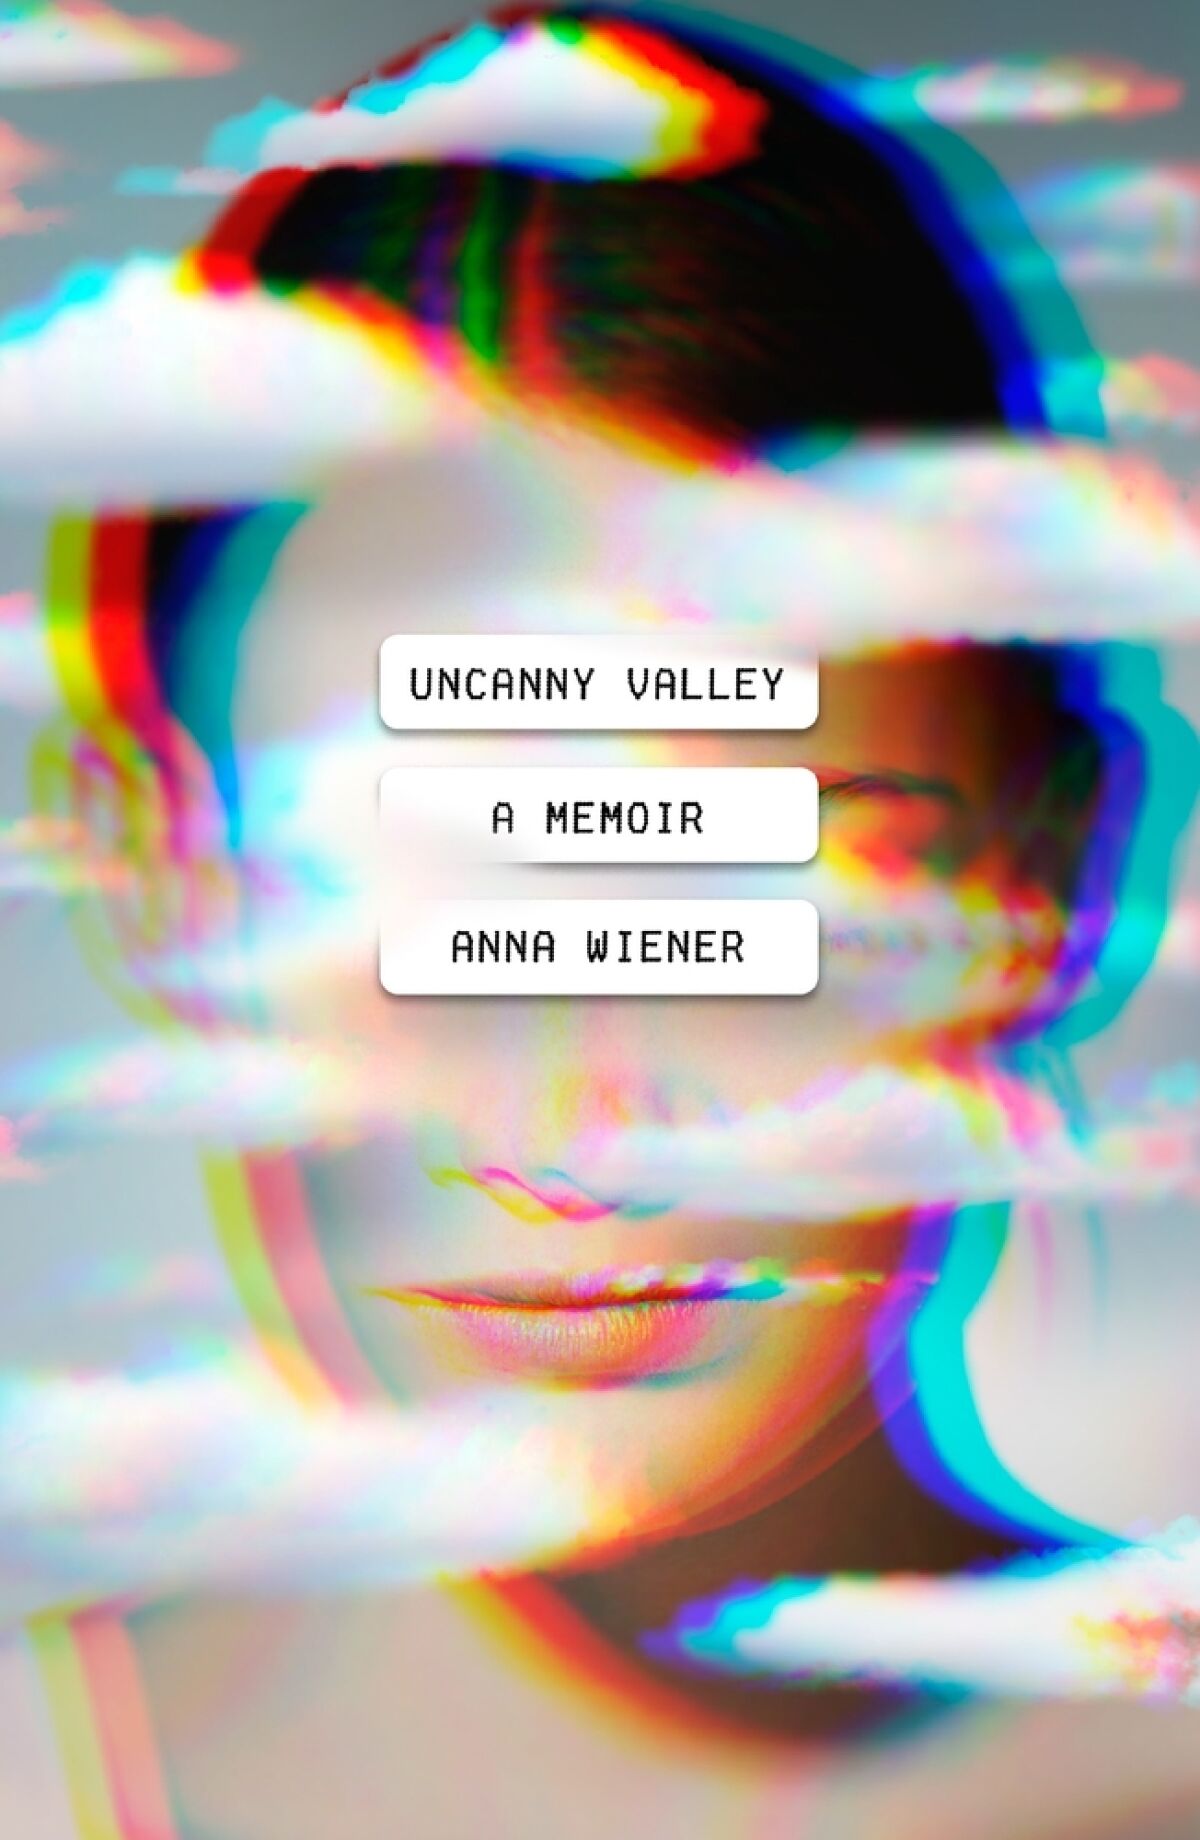 Book jacket for “Uncanny Valley” by Anna Wiener.